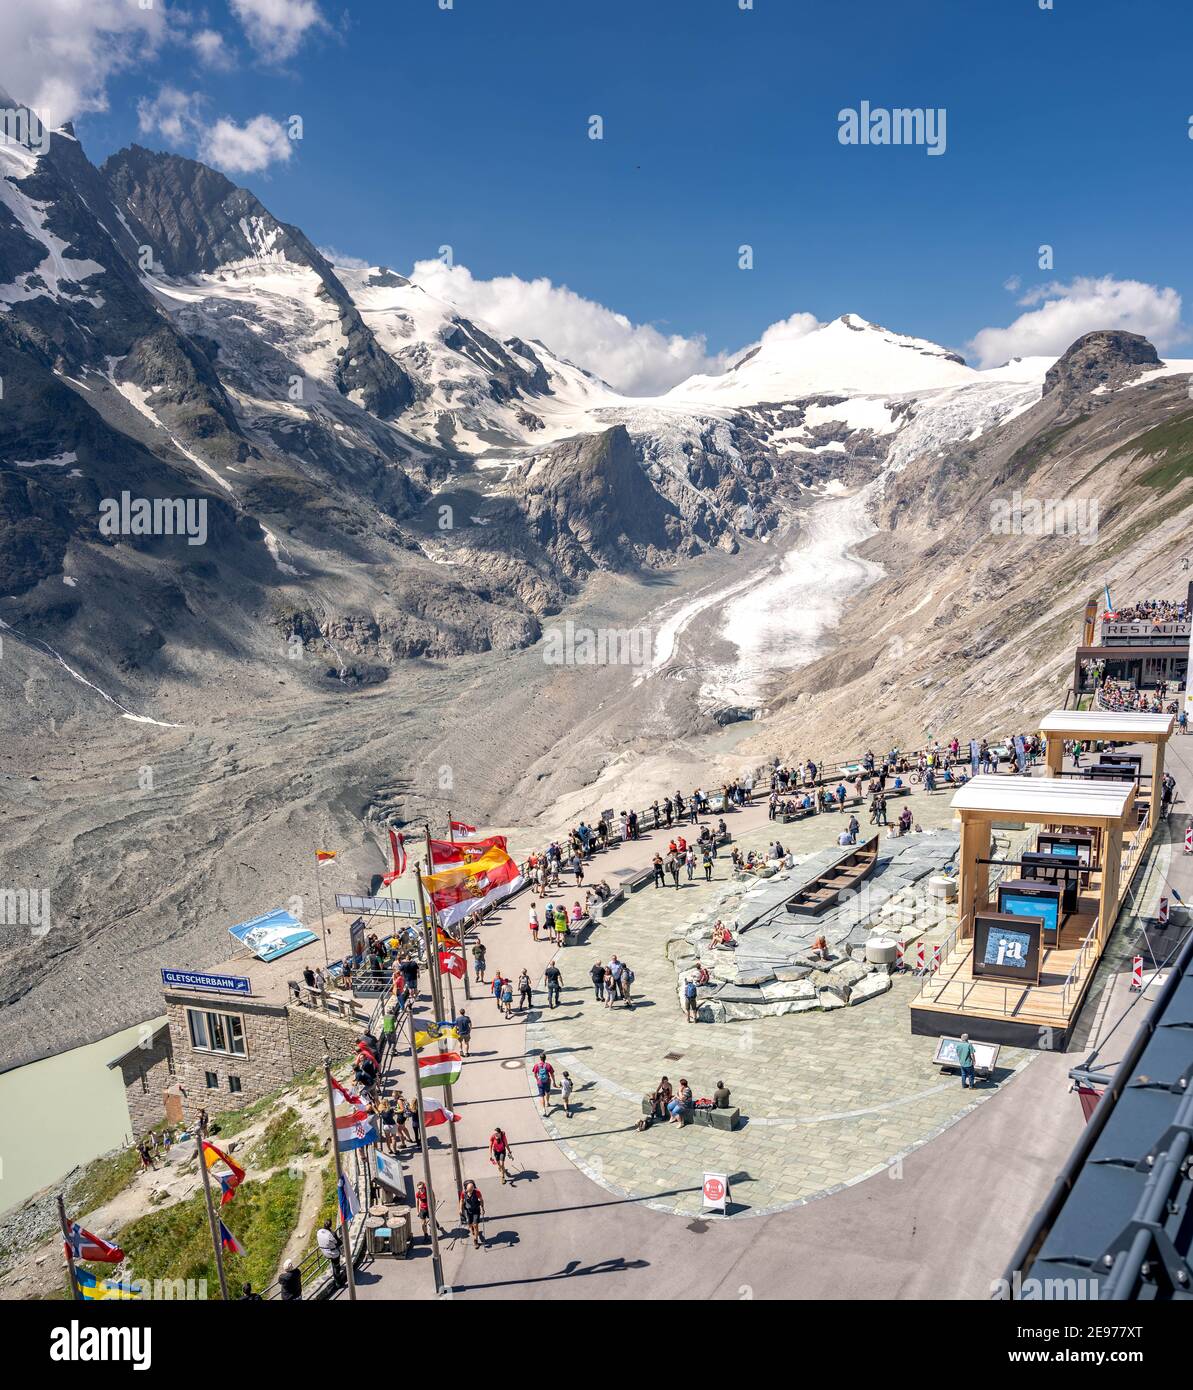 Grossglockner, Austria - Aug 8, 2020: Summit glacer view with tourists at  National Park square Kaiser Franz Josefs Stock Photo - Alamy